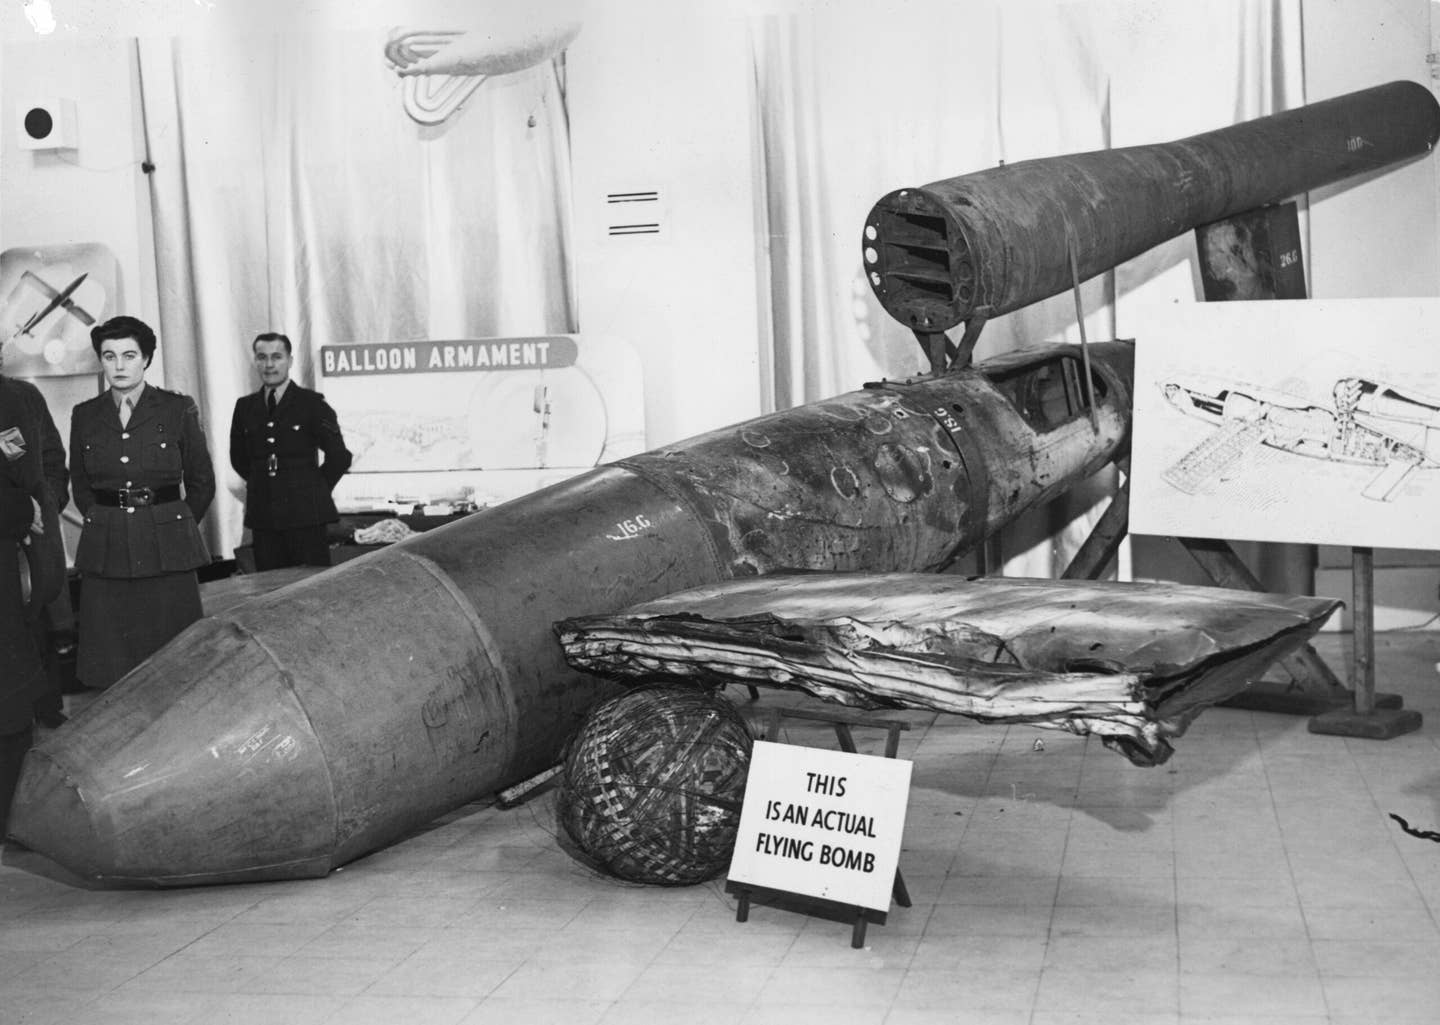 A V1 flying bomb, or Doodlebug, on show at Roote's, Piccadilly, London, November 1, 1944. A sign next to the bomb reads "This is an actual flying bomb." <em>Photo by A. R. Coster/Topical Press Agency via Getty Images.</em>